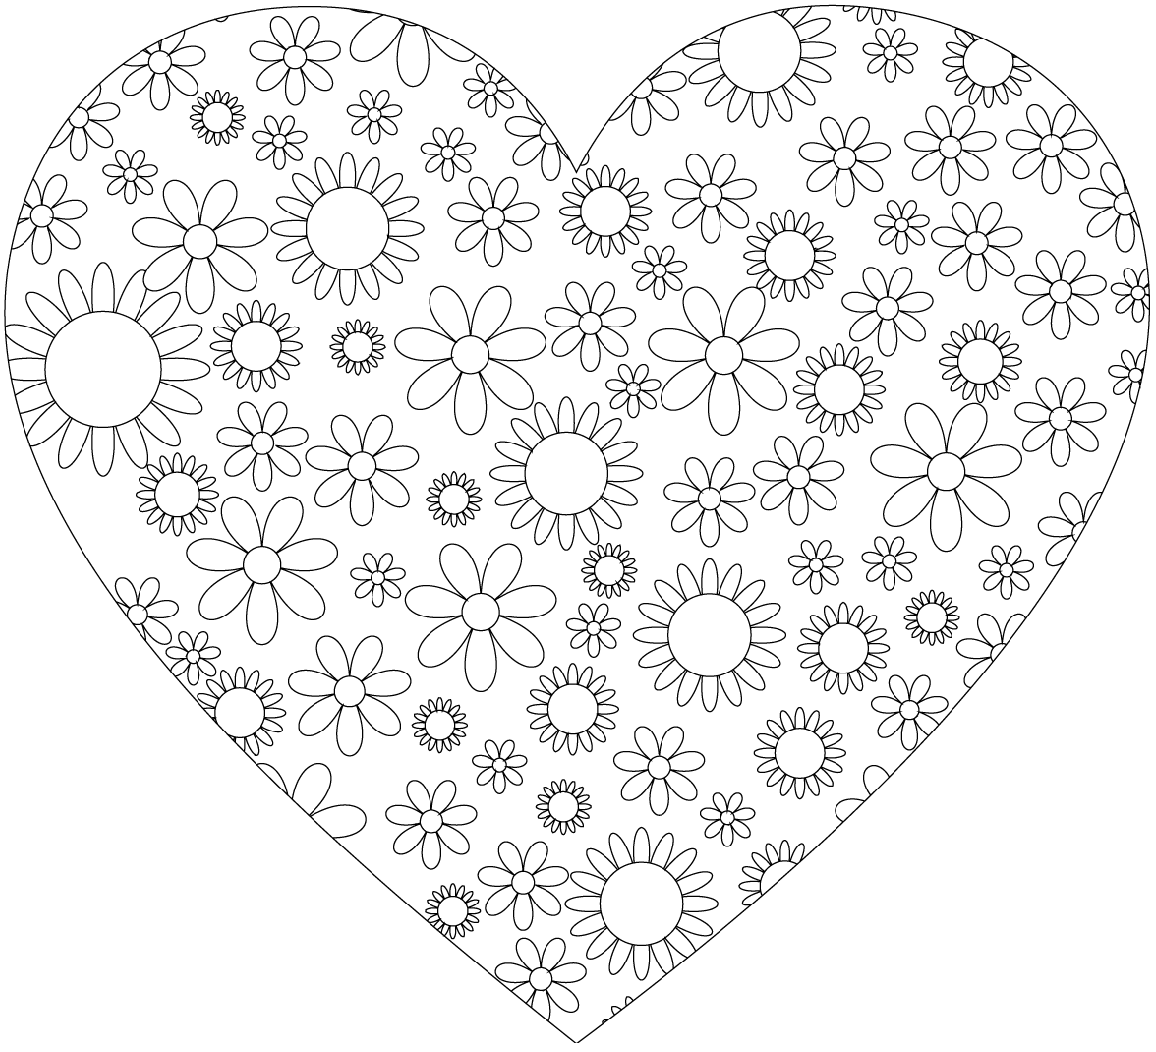 Heart With Flowers Coloring Page